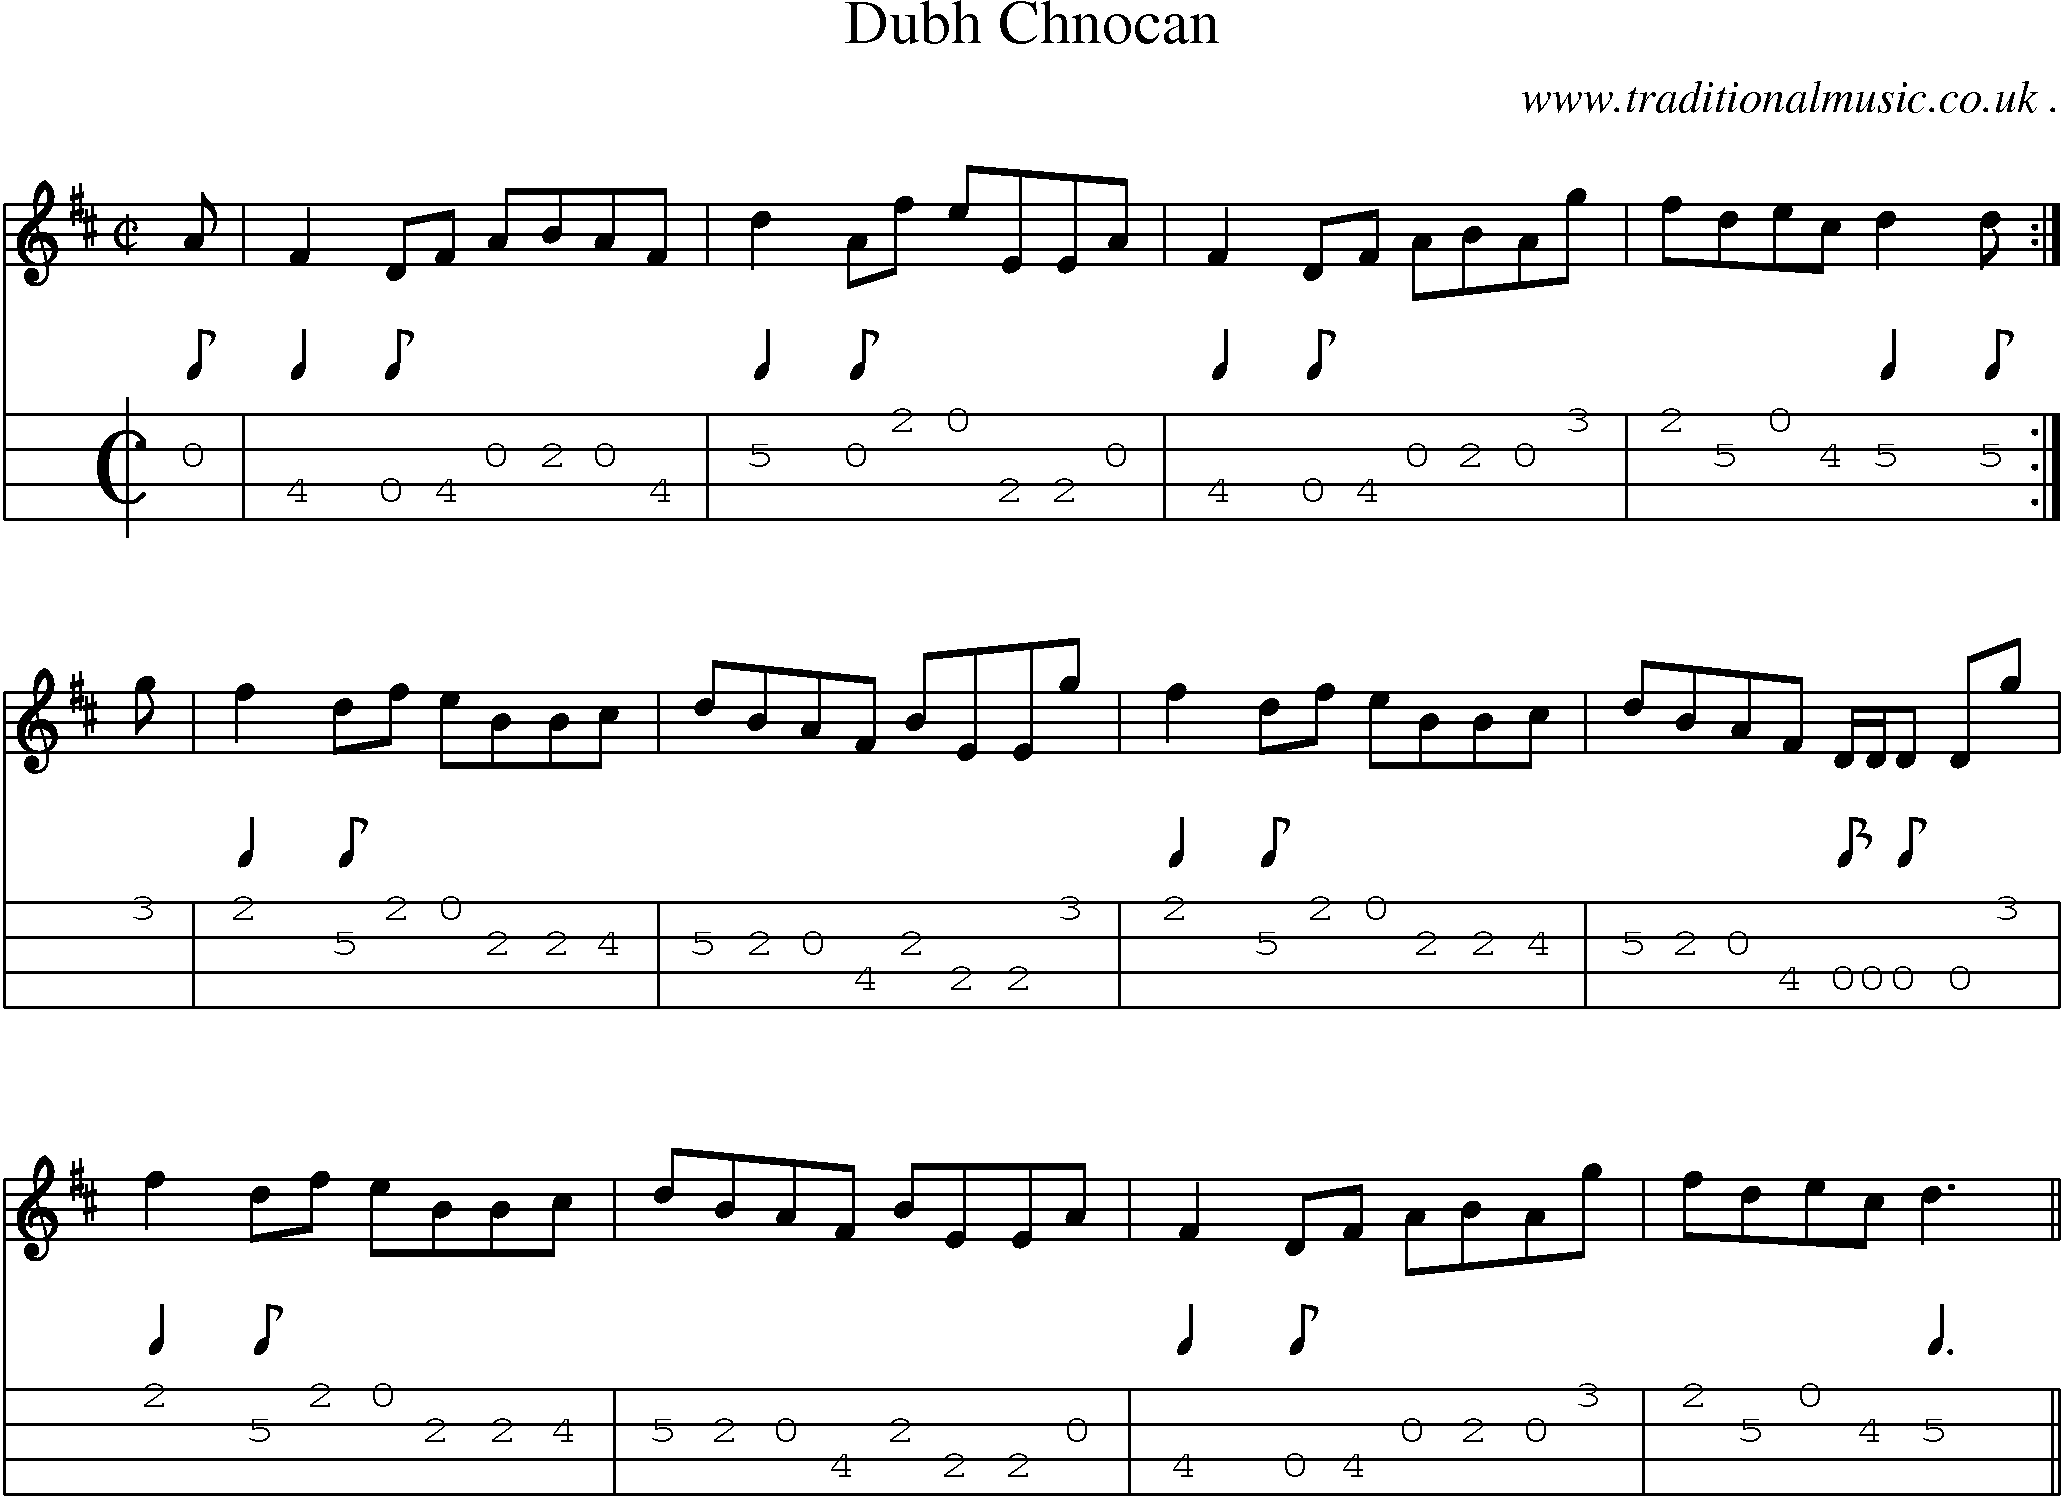 Sheet-music  score, Chords and Mandolin Tabs for Dubh Chnocan